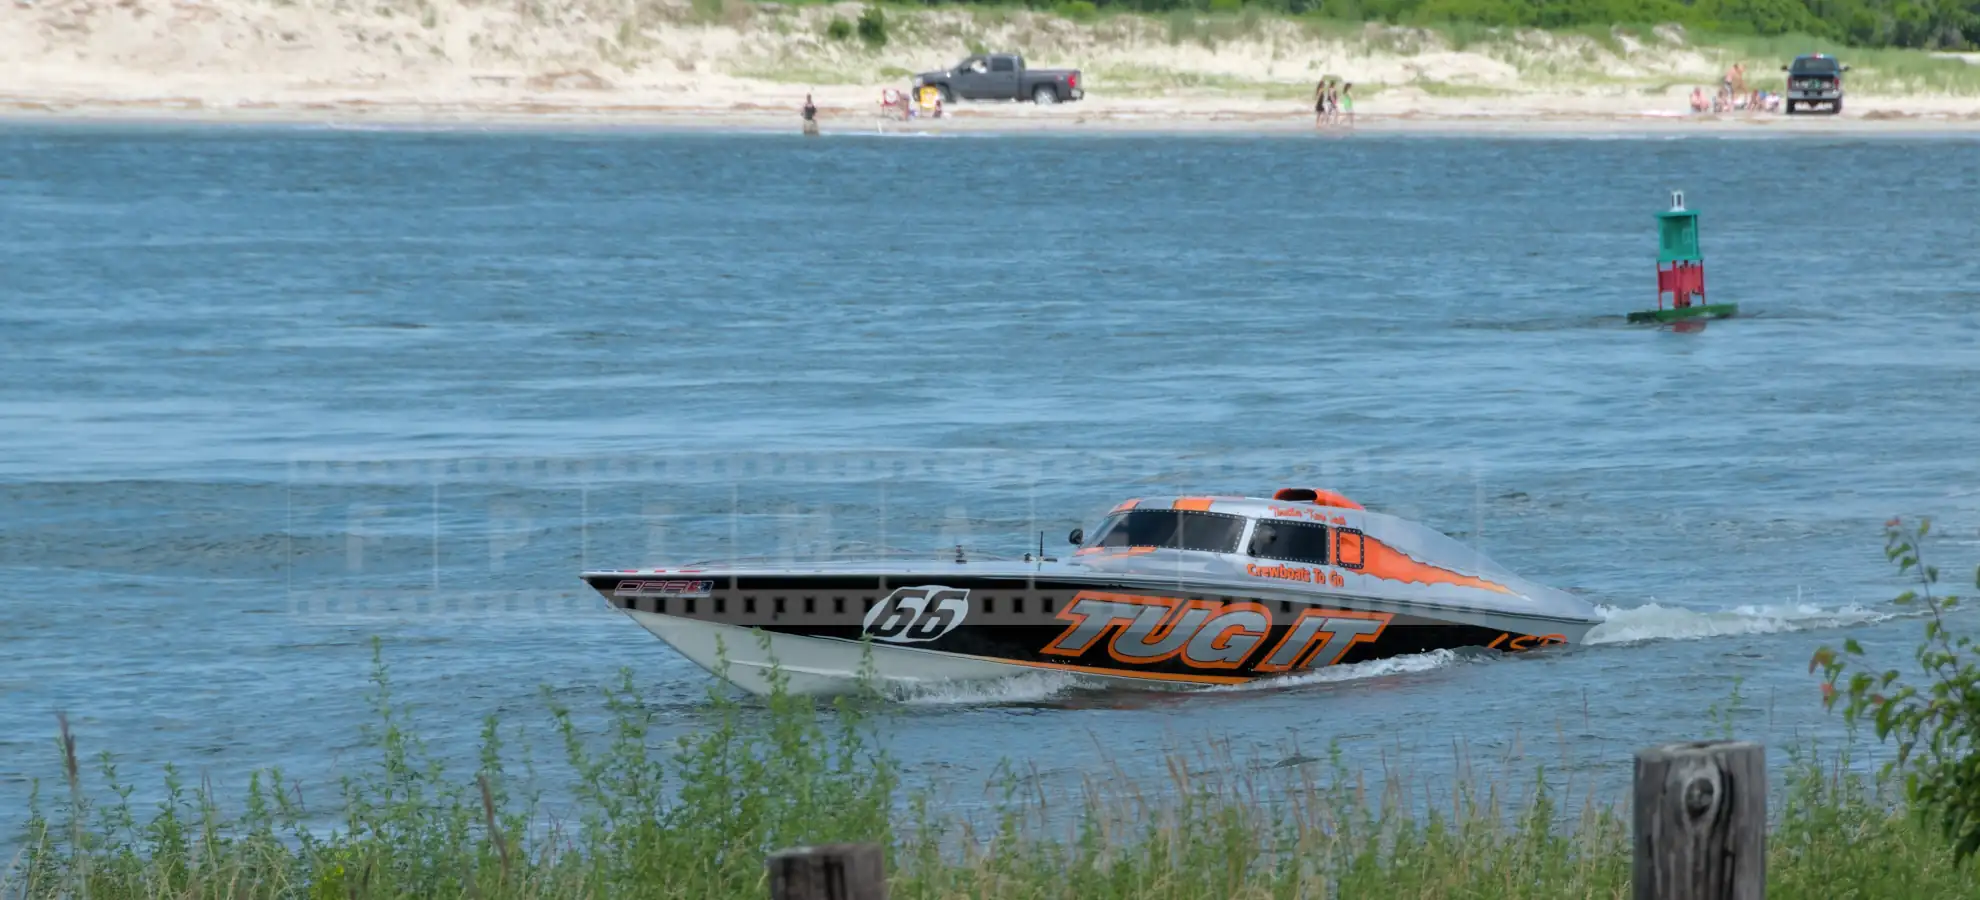 Tug It power speed boat #66 in Absecon Inlet